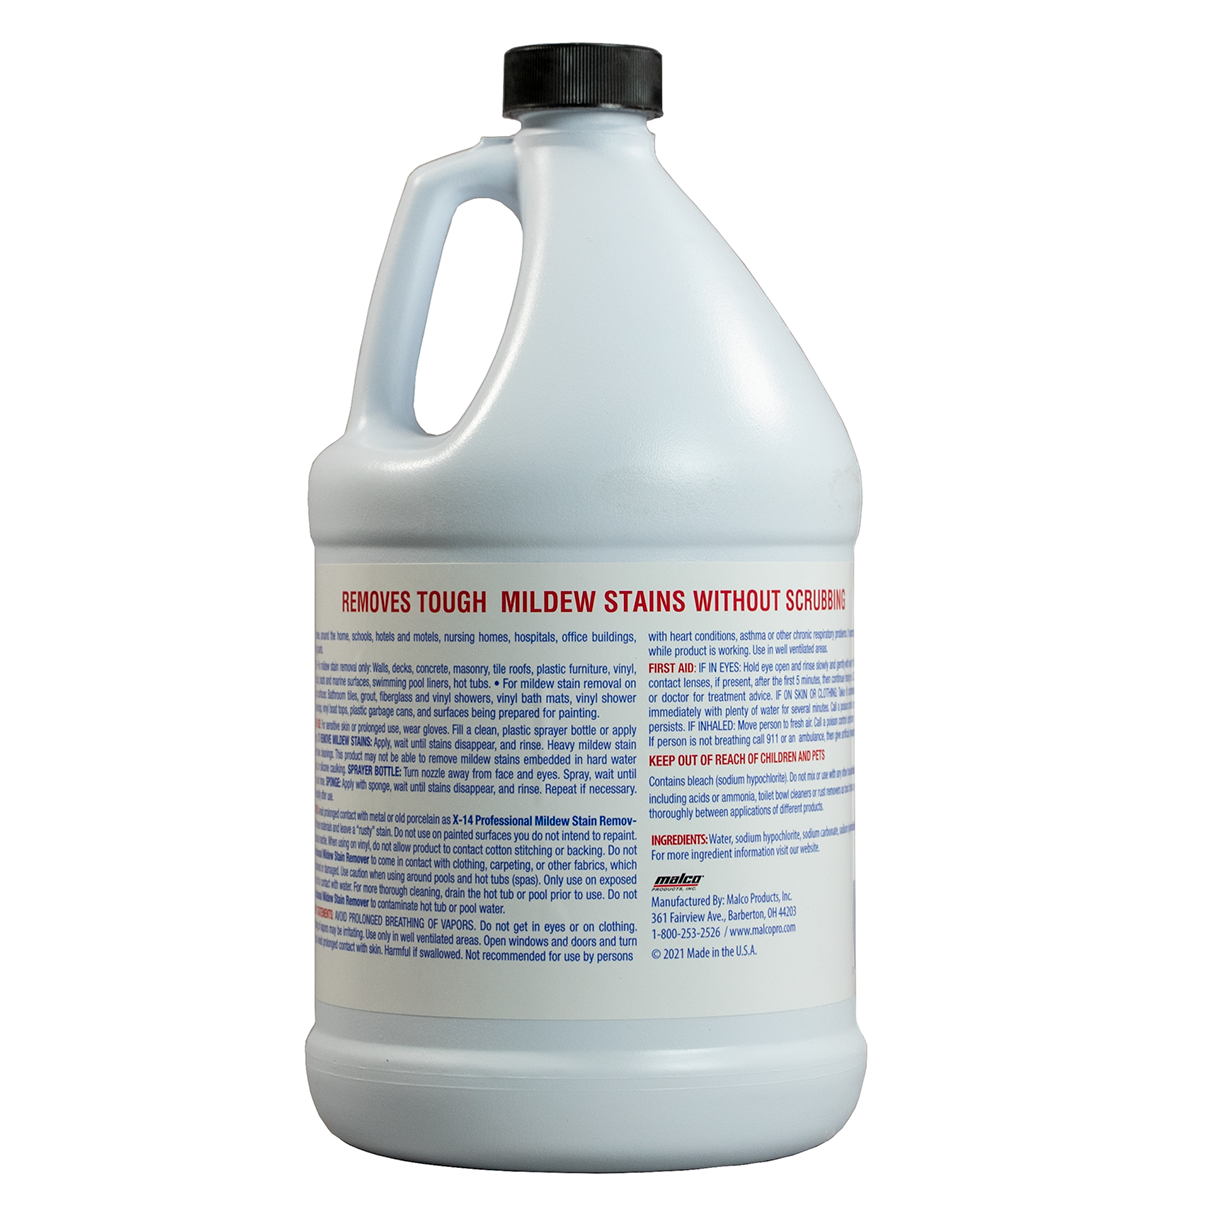 X-14® Professional Mildew Stain Remover BACK